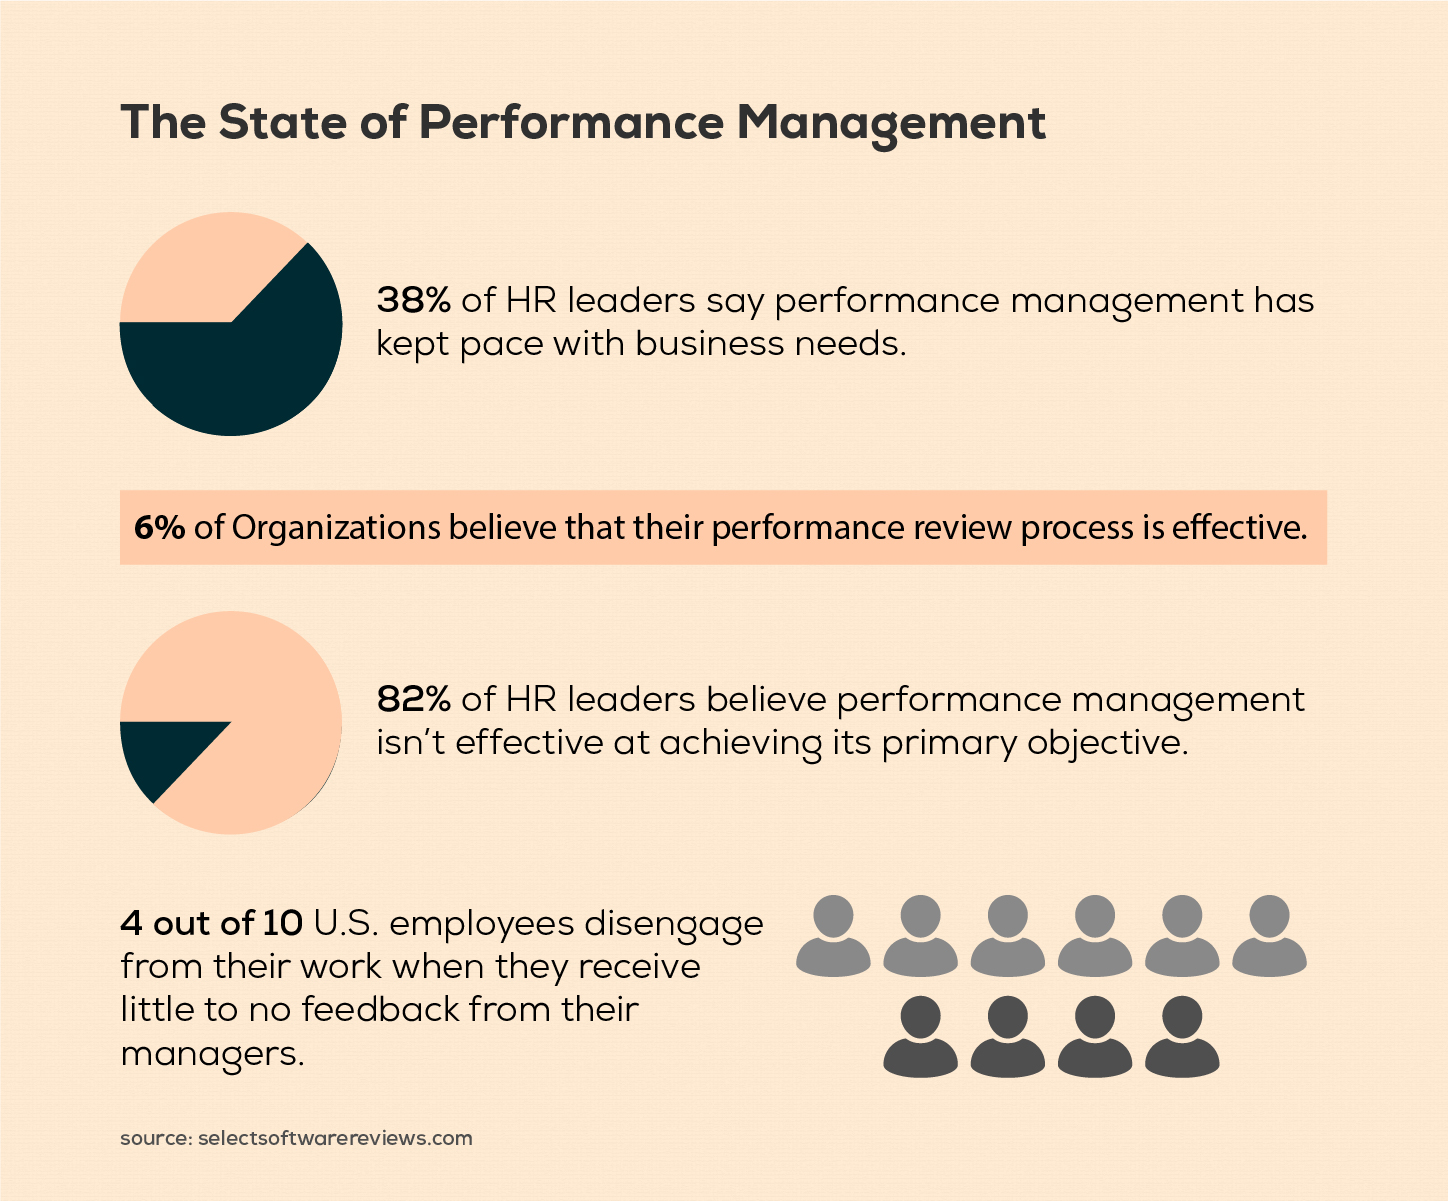 The State of Performance Management